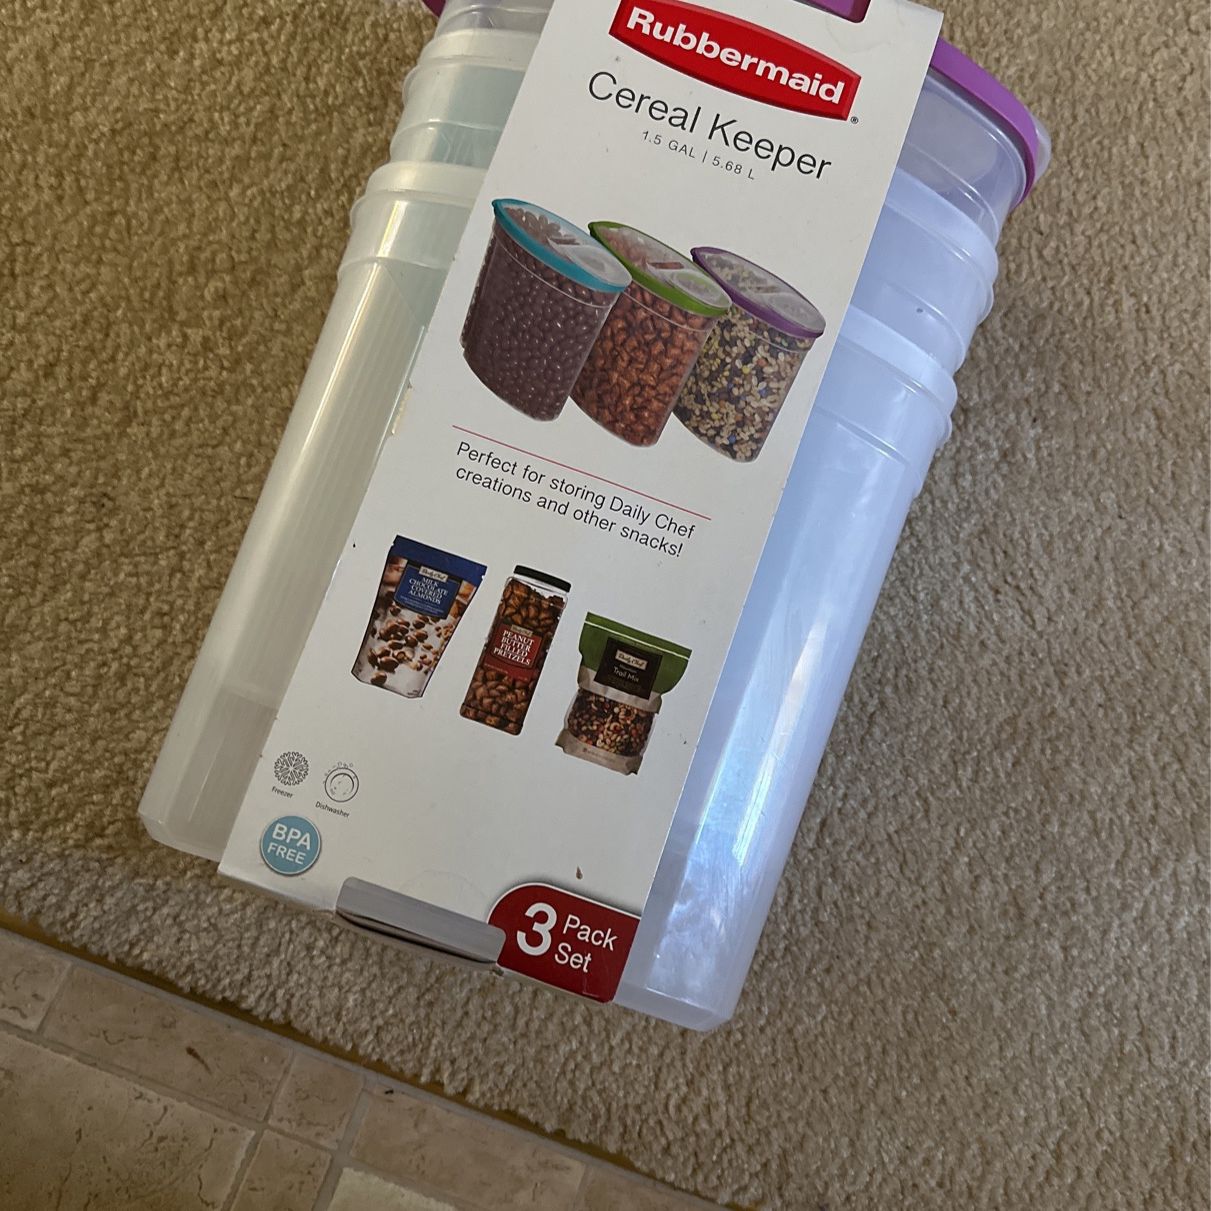 Rubbermaid Cereal Keeper for Sale in Peachtree Corners, GA - OfferUp